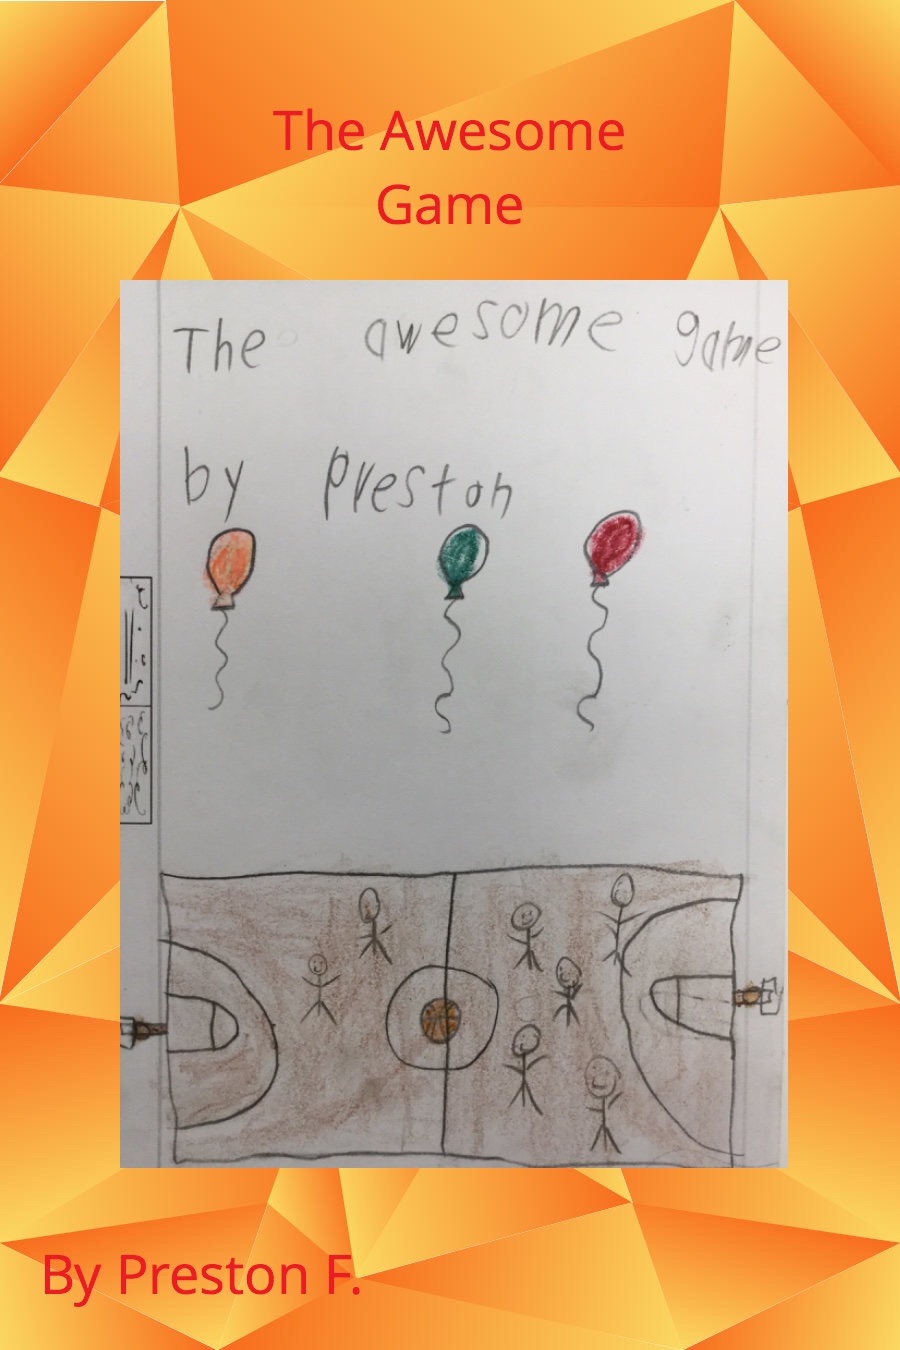 The Awesome Game by Preston F (1)